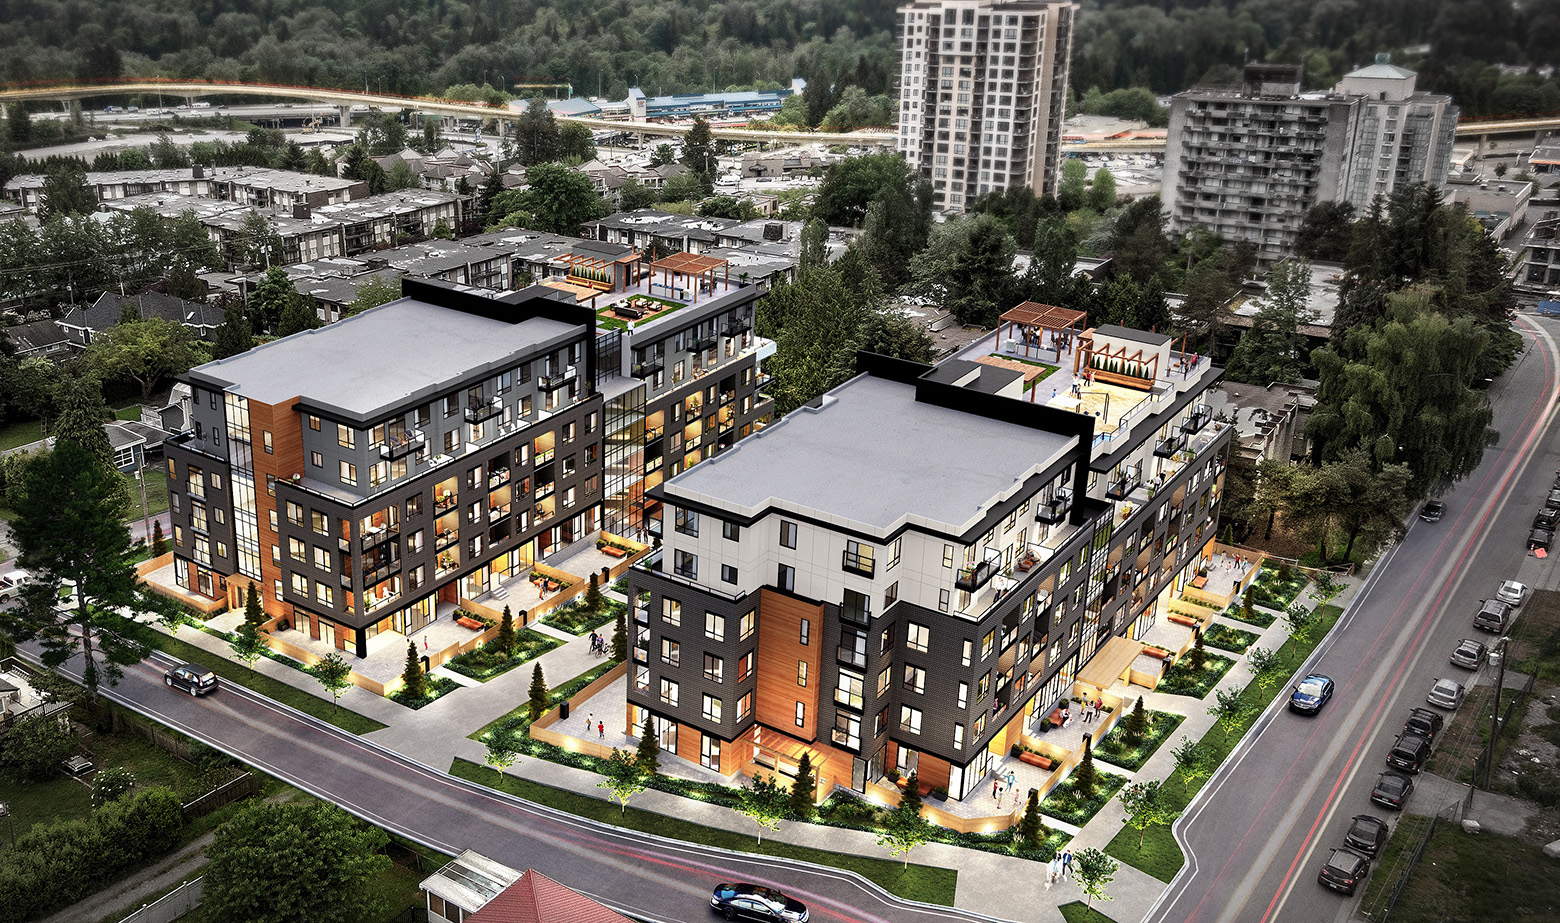 “The Linc” is a 144-unit, Two 6-storey residential development in Coquitlam, BC. Design by Group 161 | Atelier Pacific Architecture.